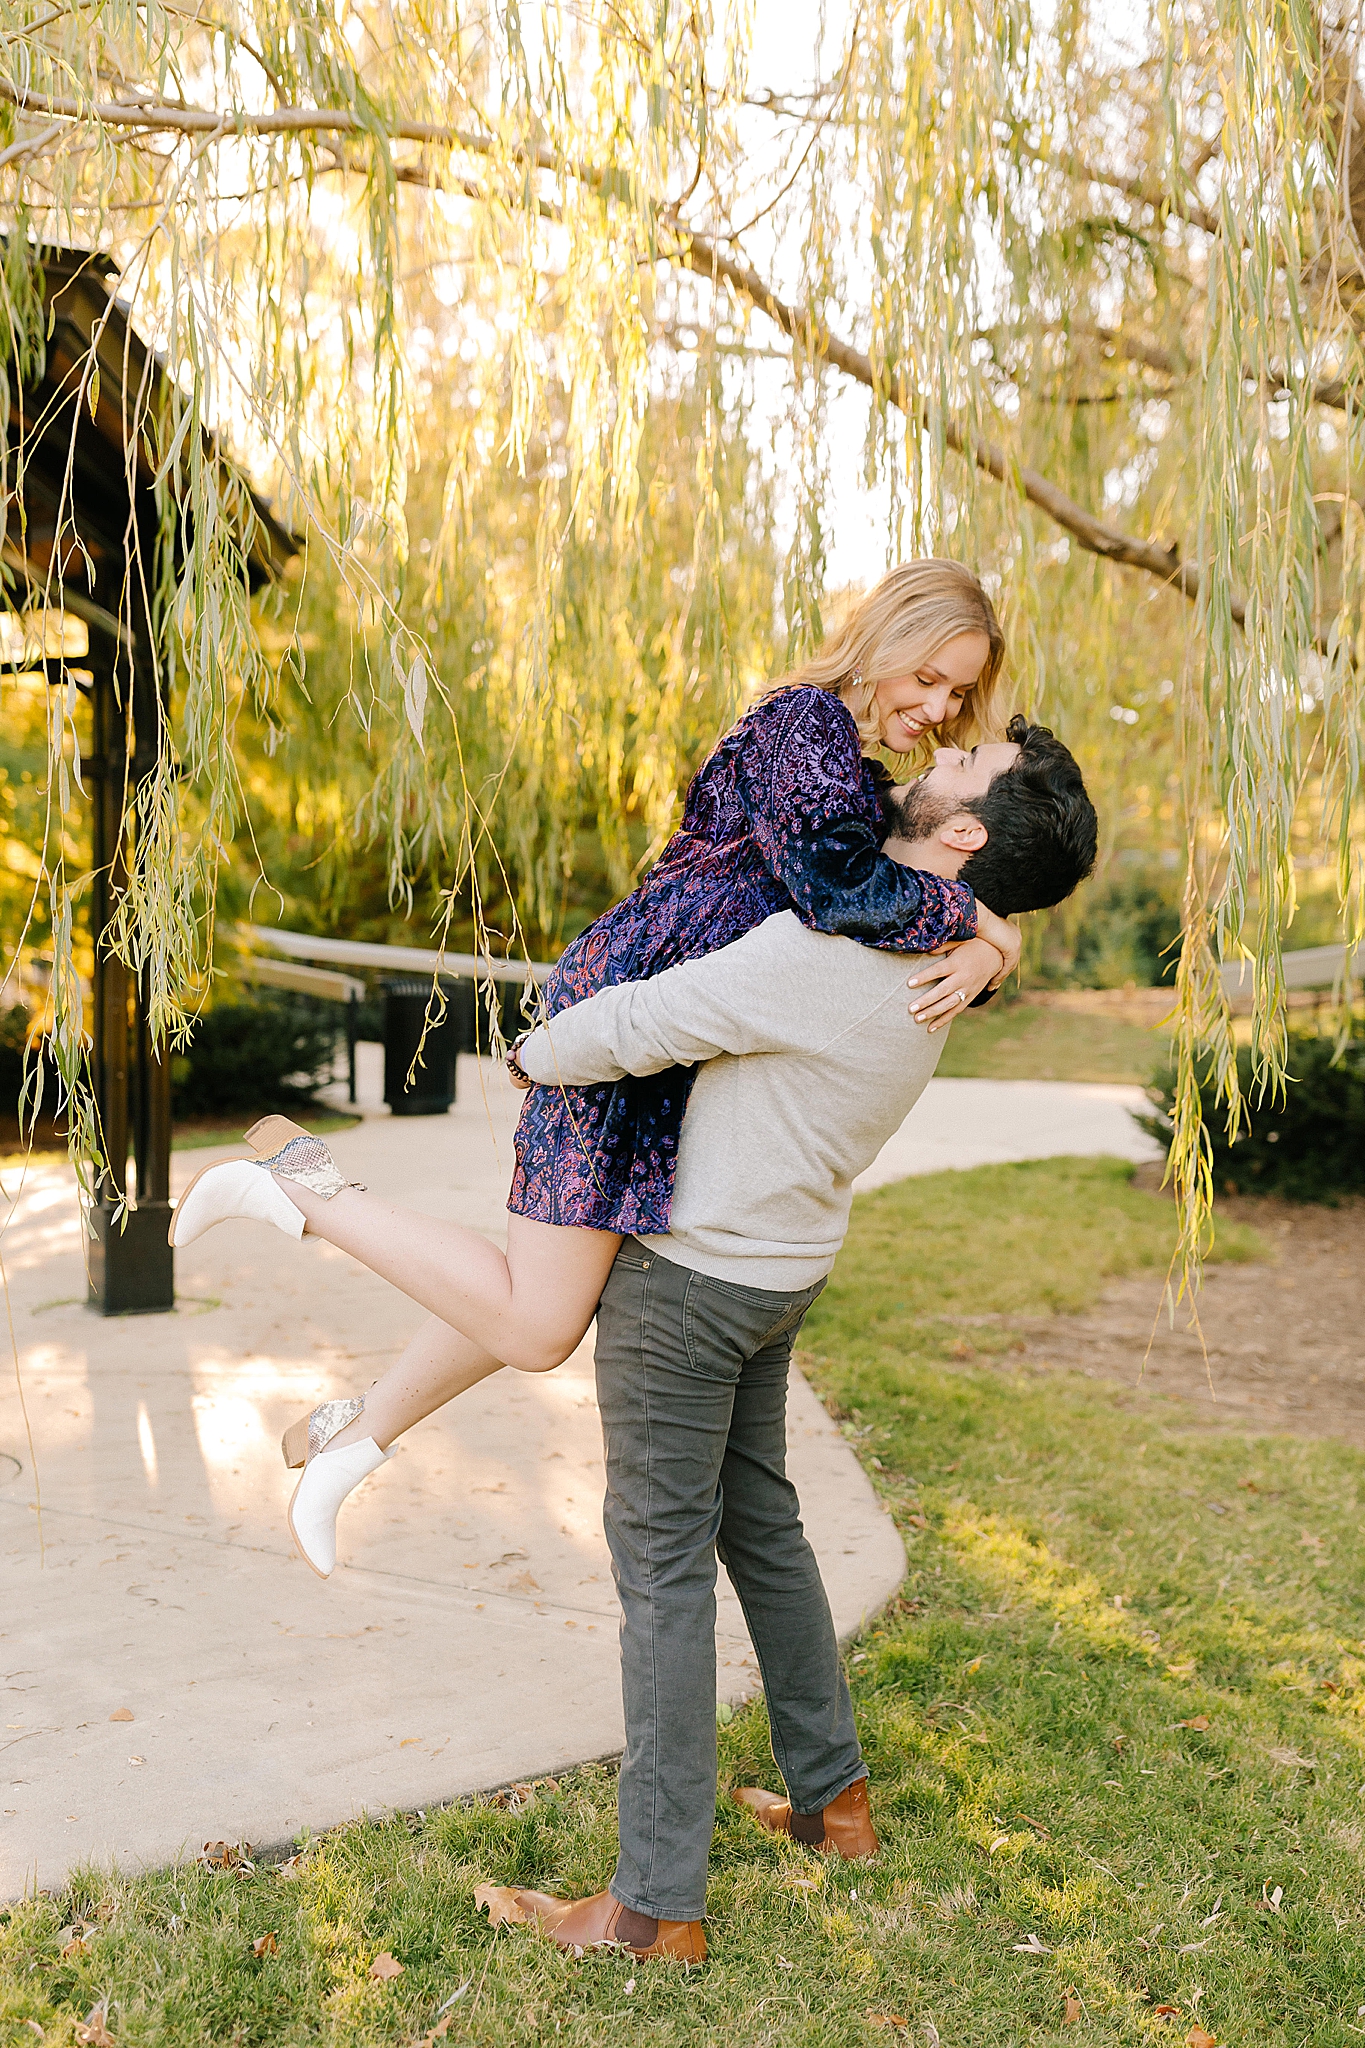 groom lifts bride during engagement photos by pavilion in Pullen Park